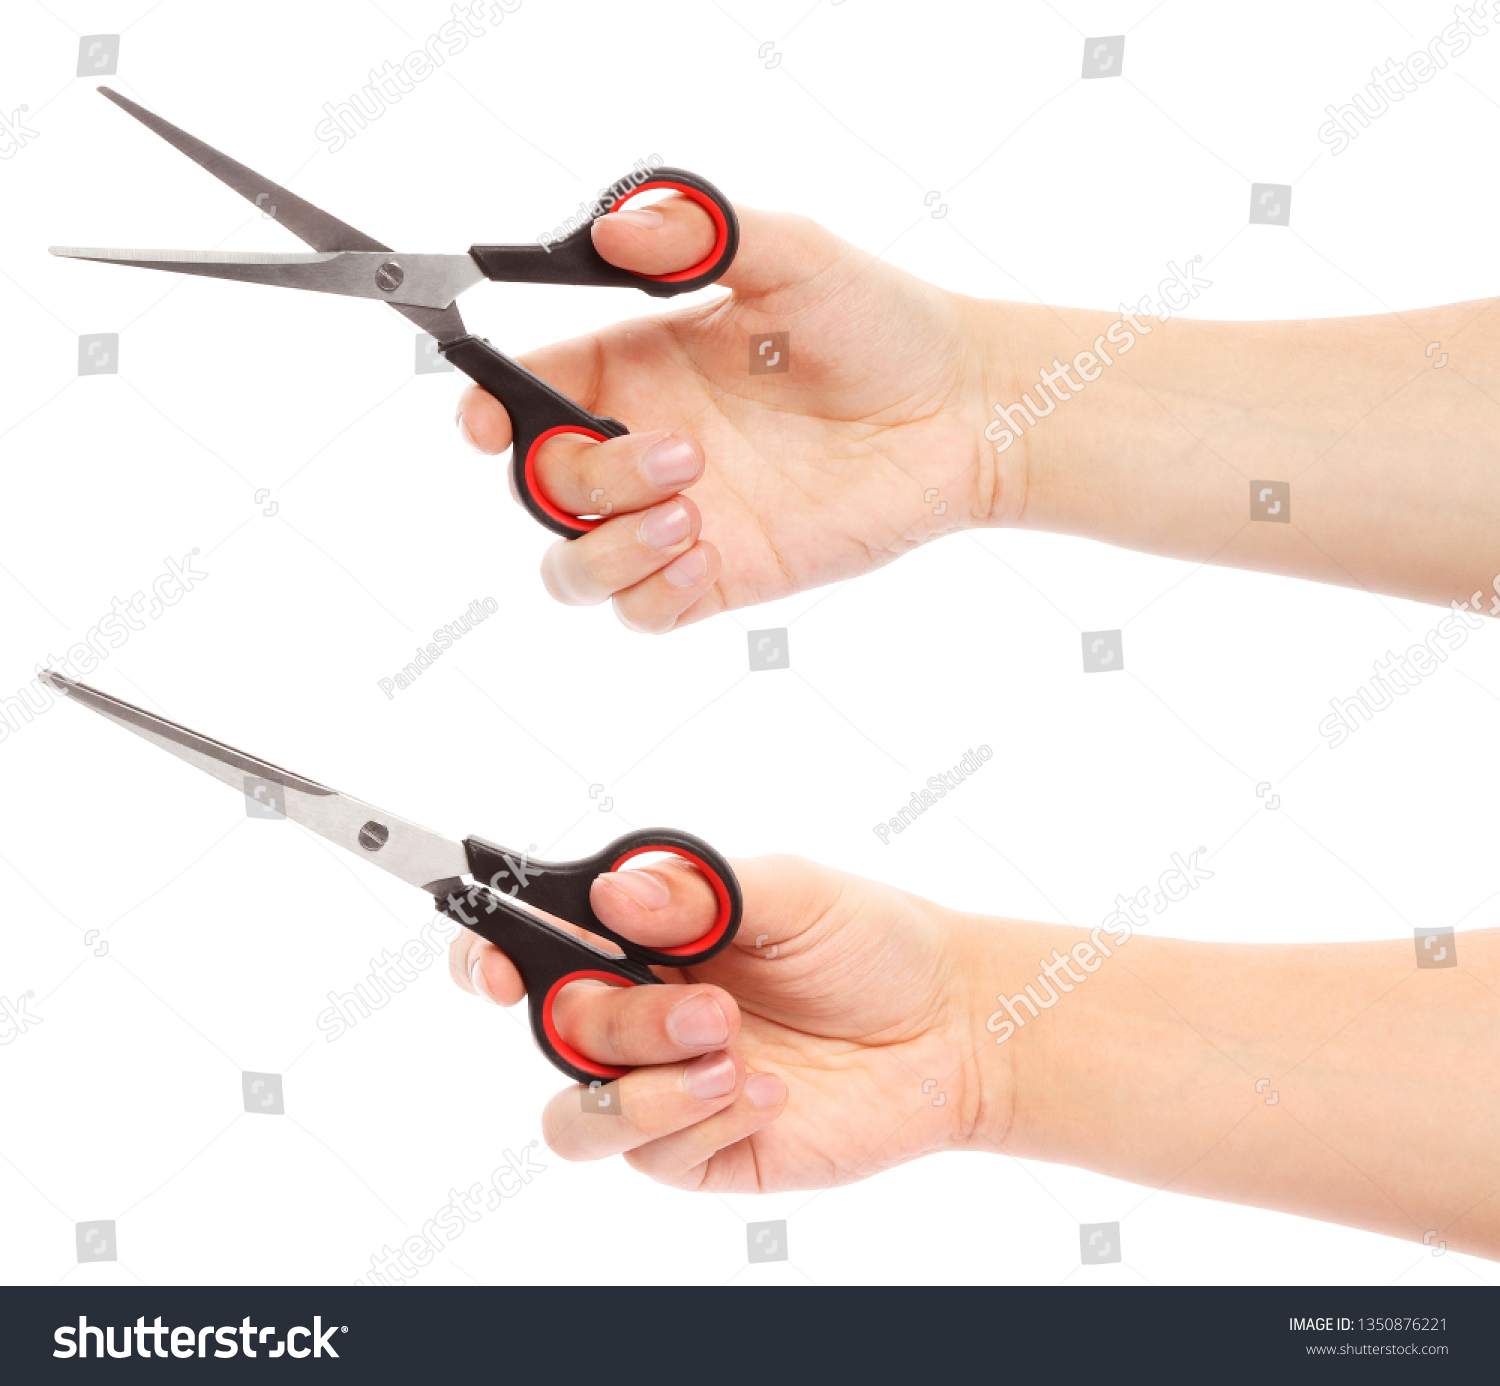 Hand holds scissors isolated on white background. Scissors in hand #1350876221